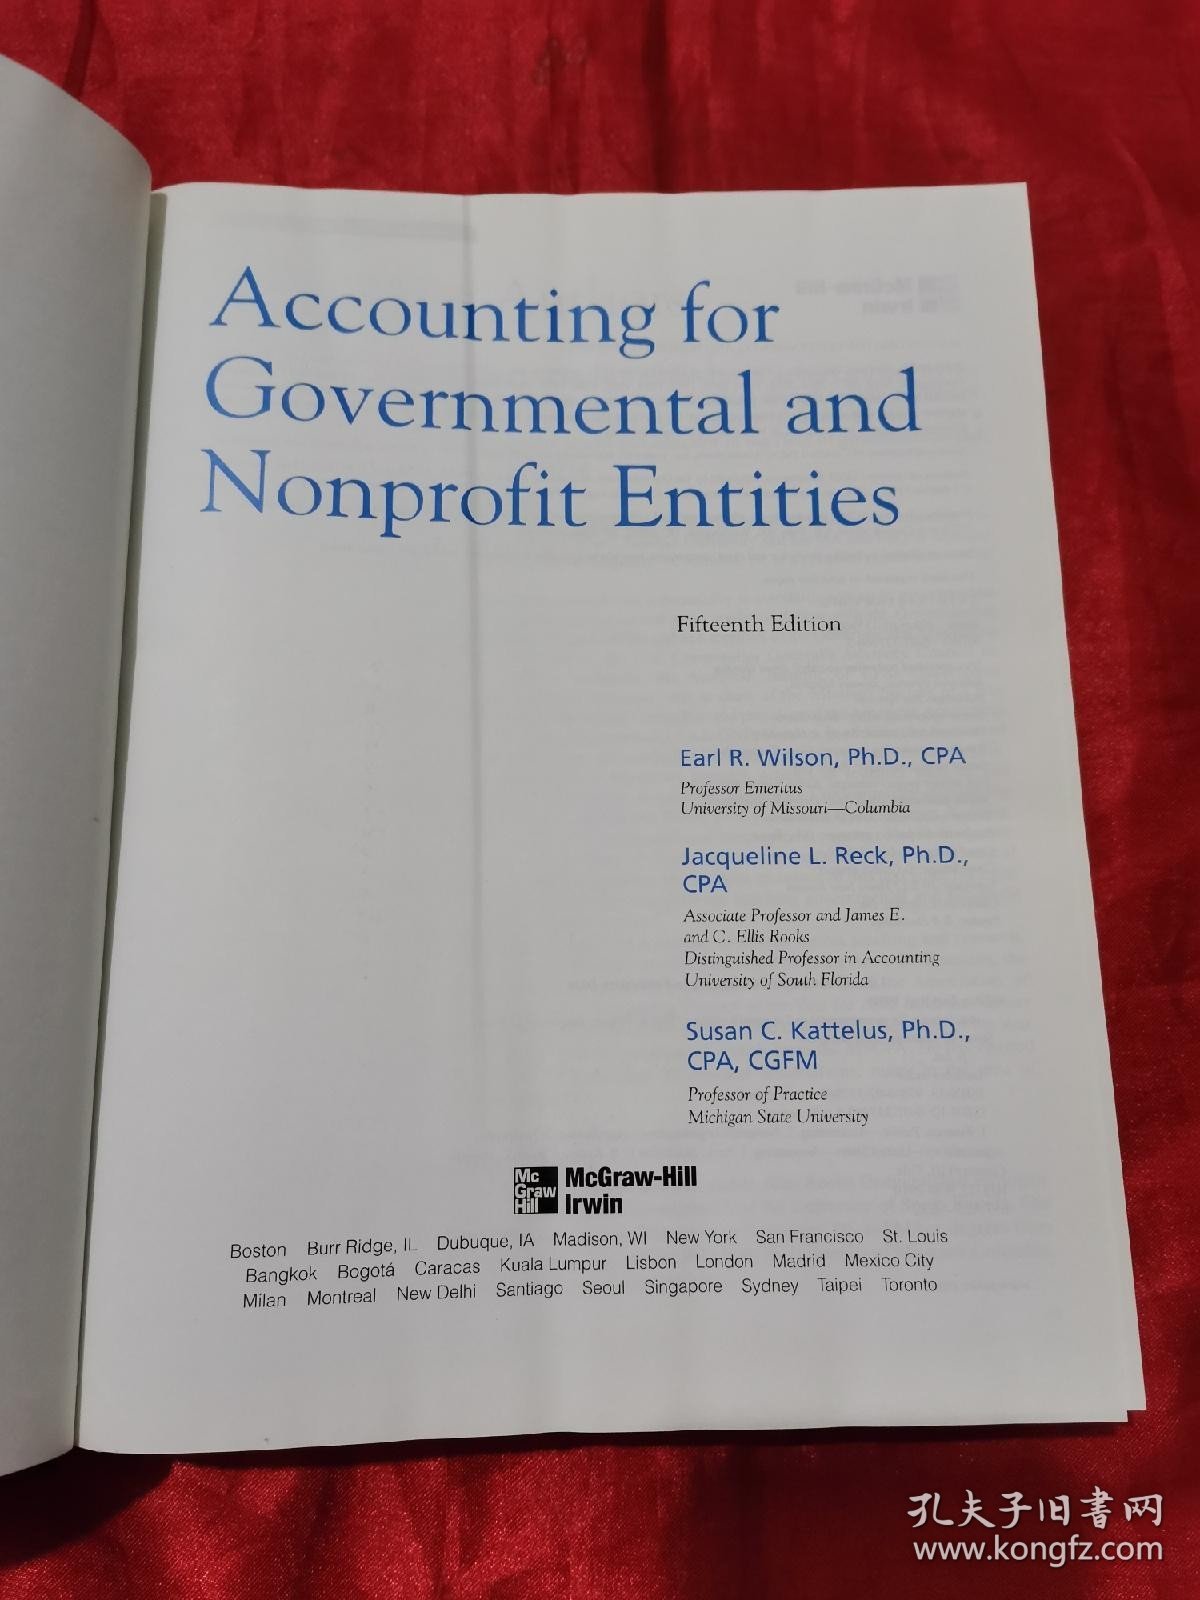 Accounting for Governmental and Nonprofit Entities (15th Edition) 16开，精装